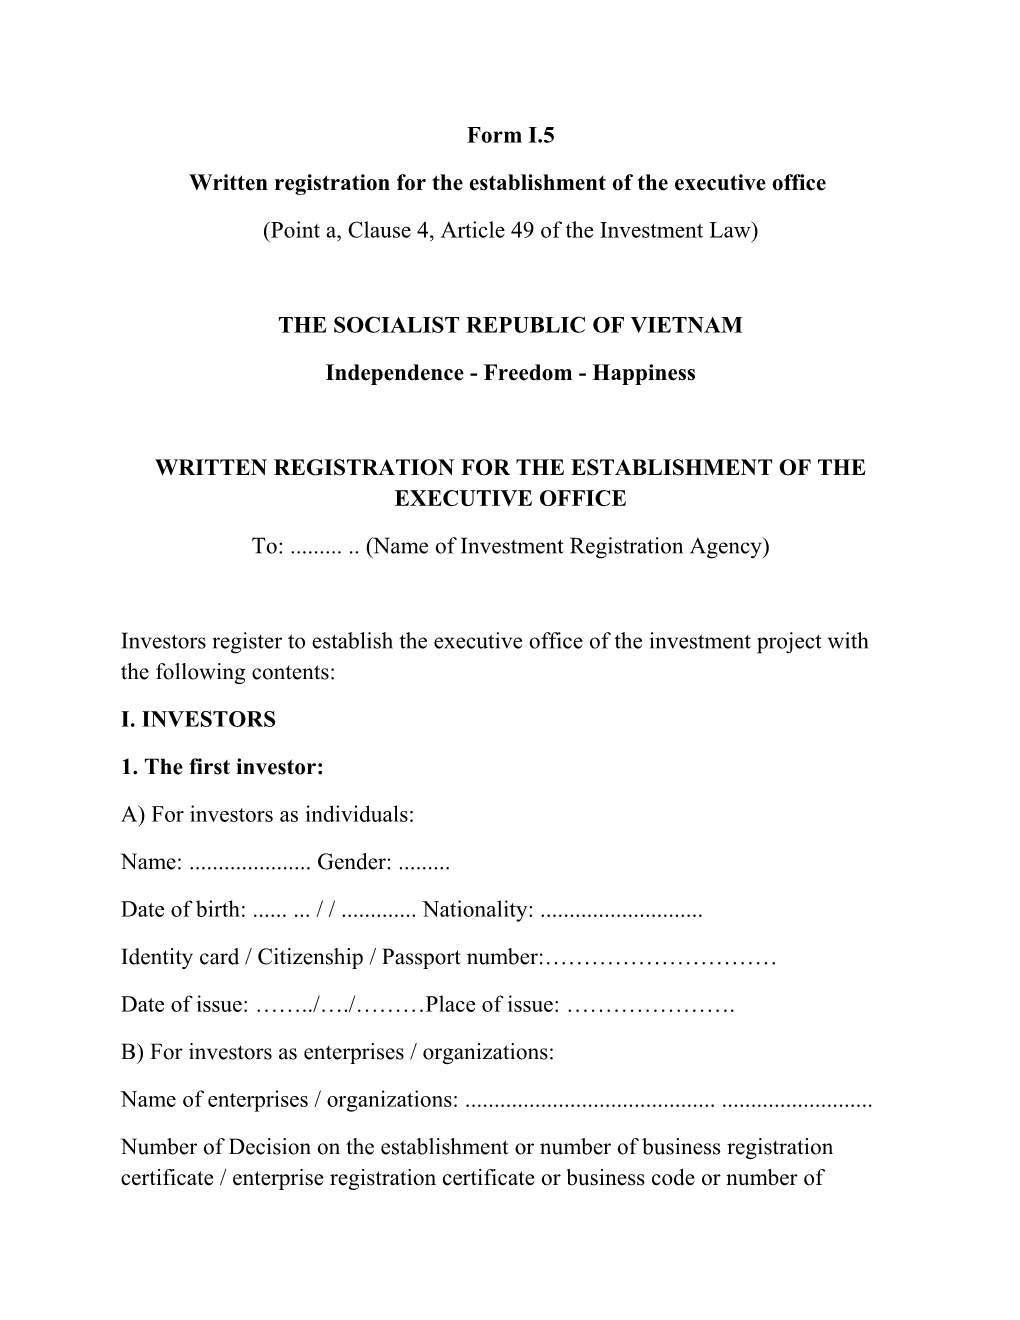 Written Registration for the Establishment of the Executive Office